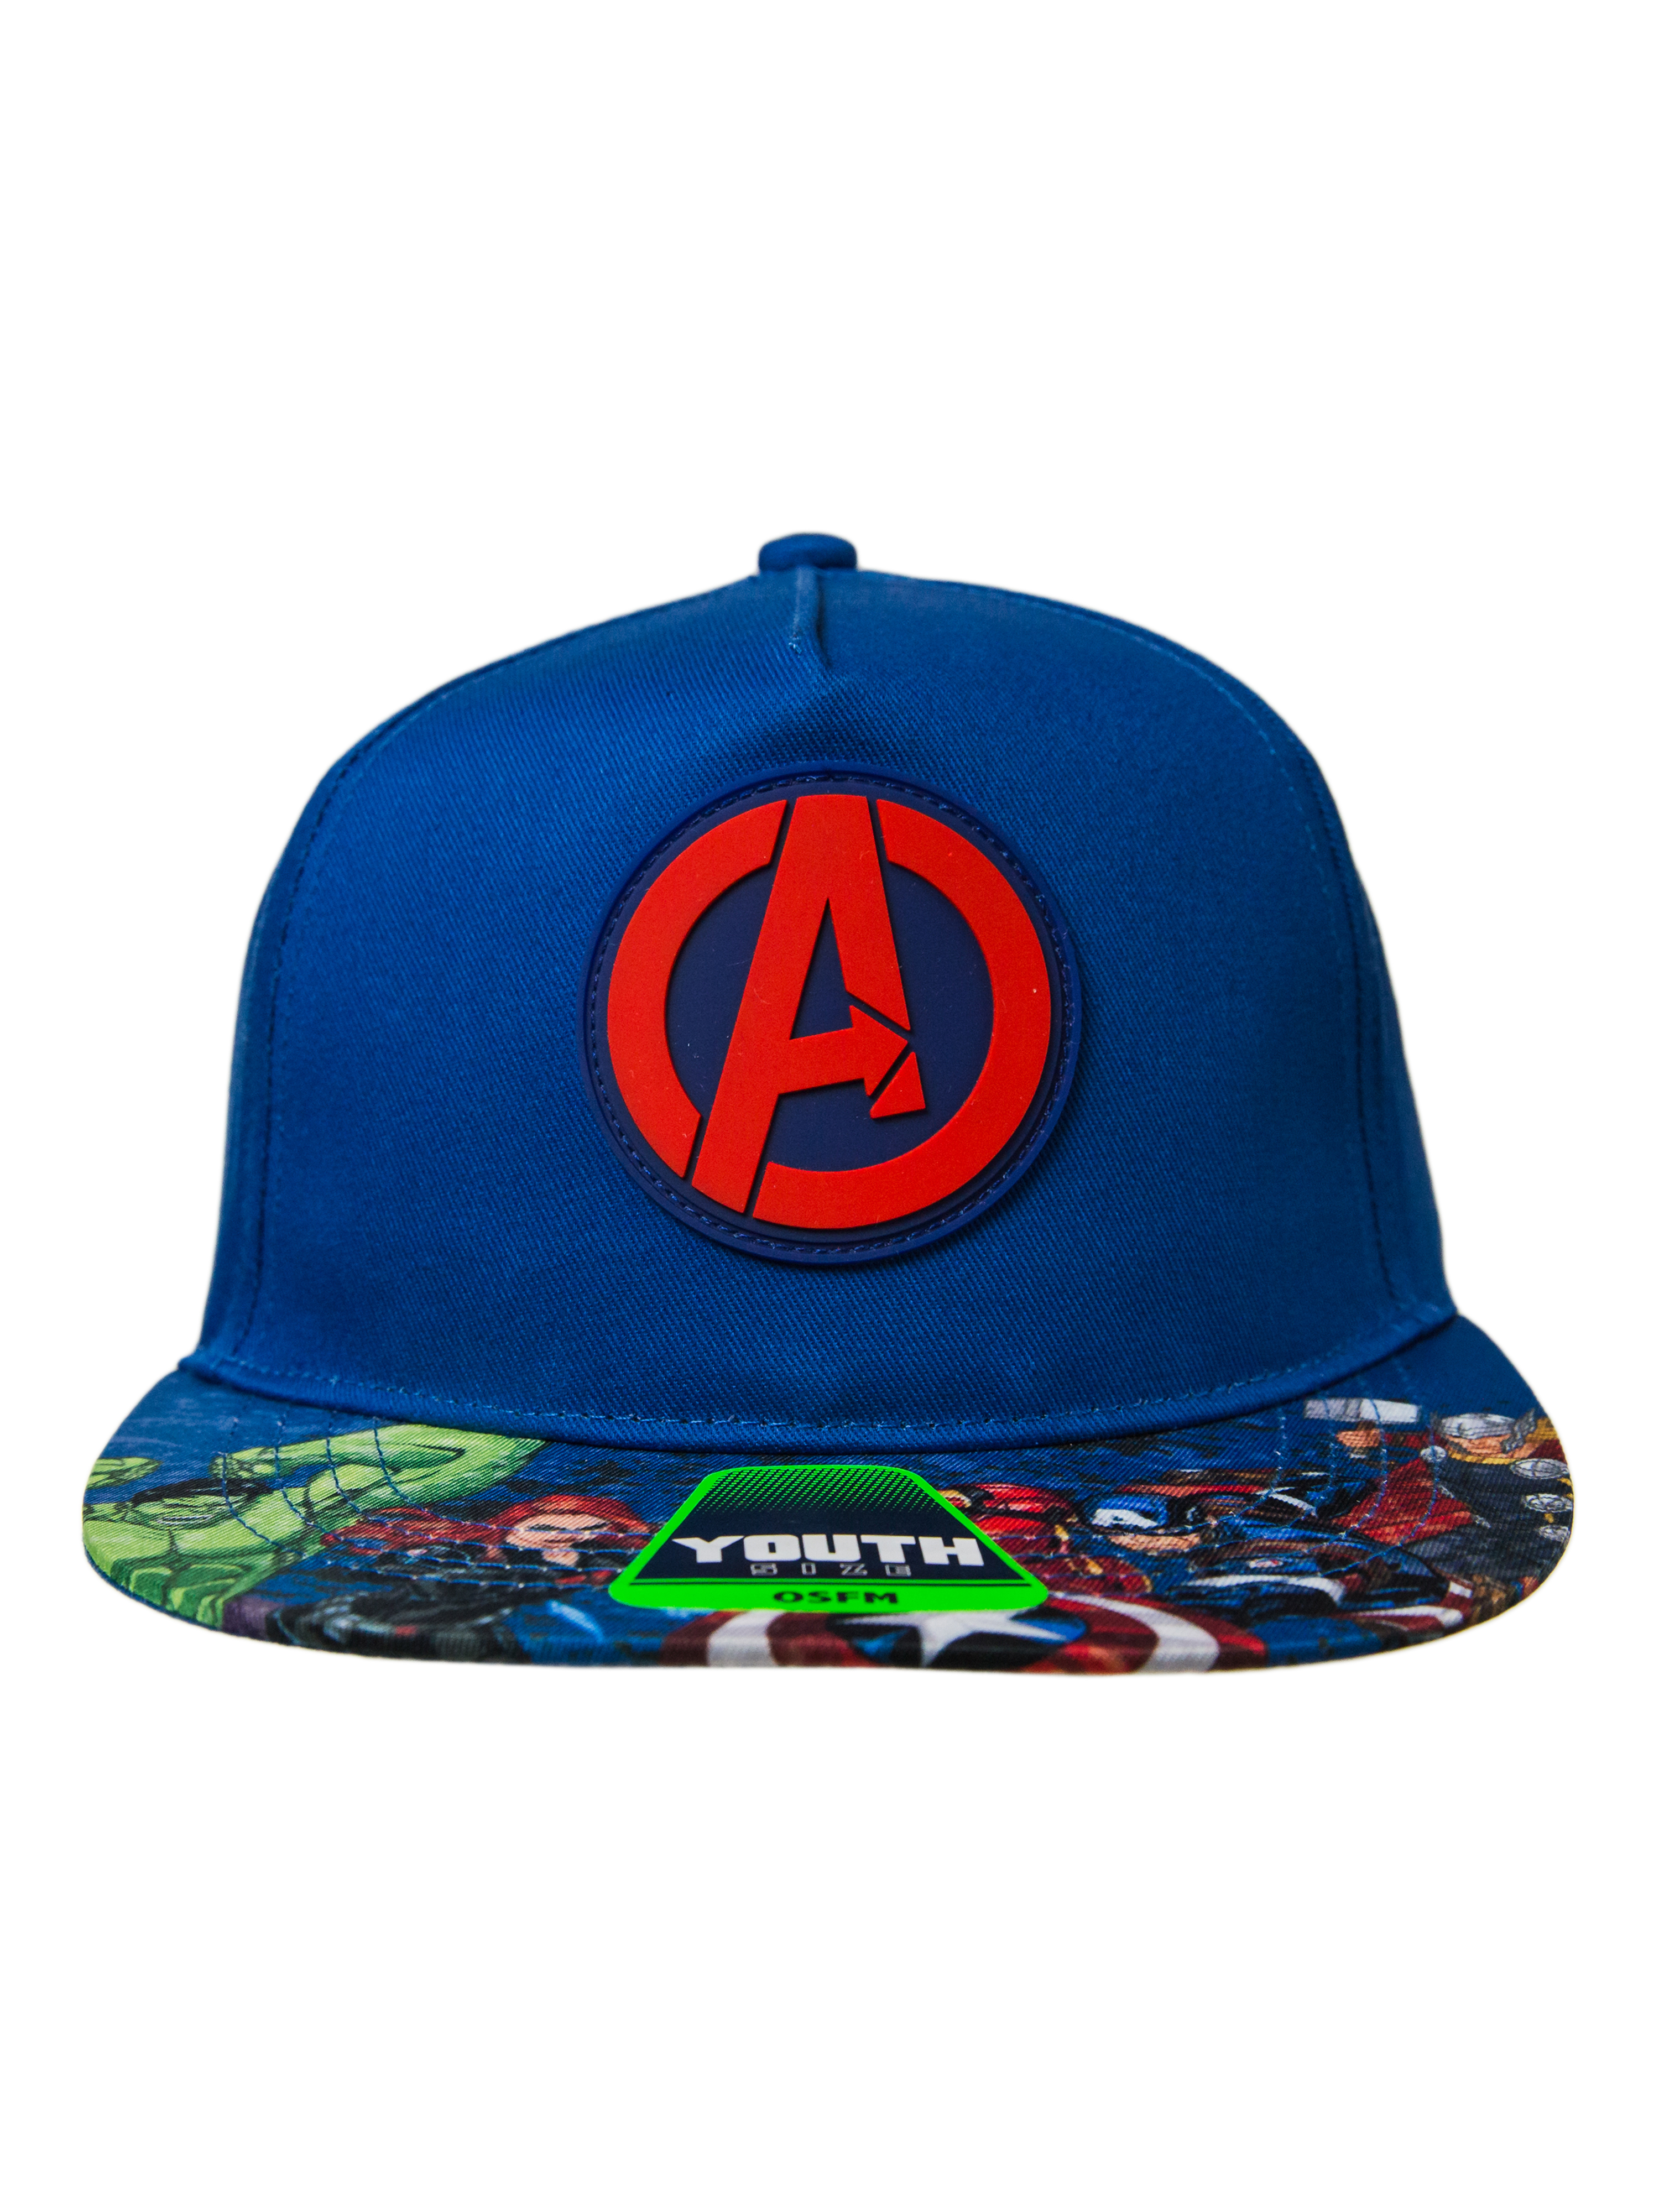 Marvel Avengers Boys Baseball Hat And Tri-Fold Wallet Combo, Youth Size - image 5 of 6